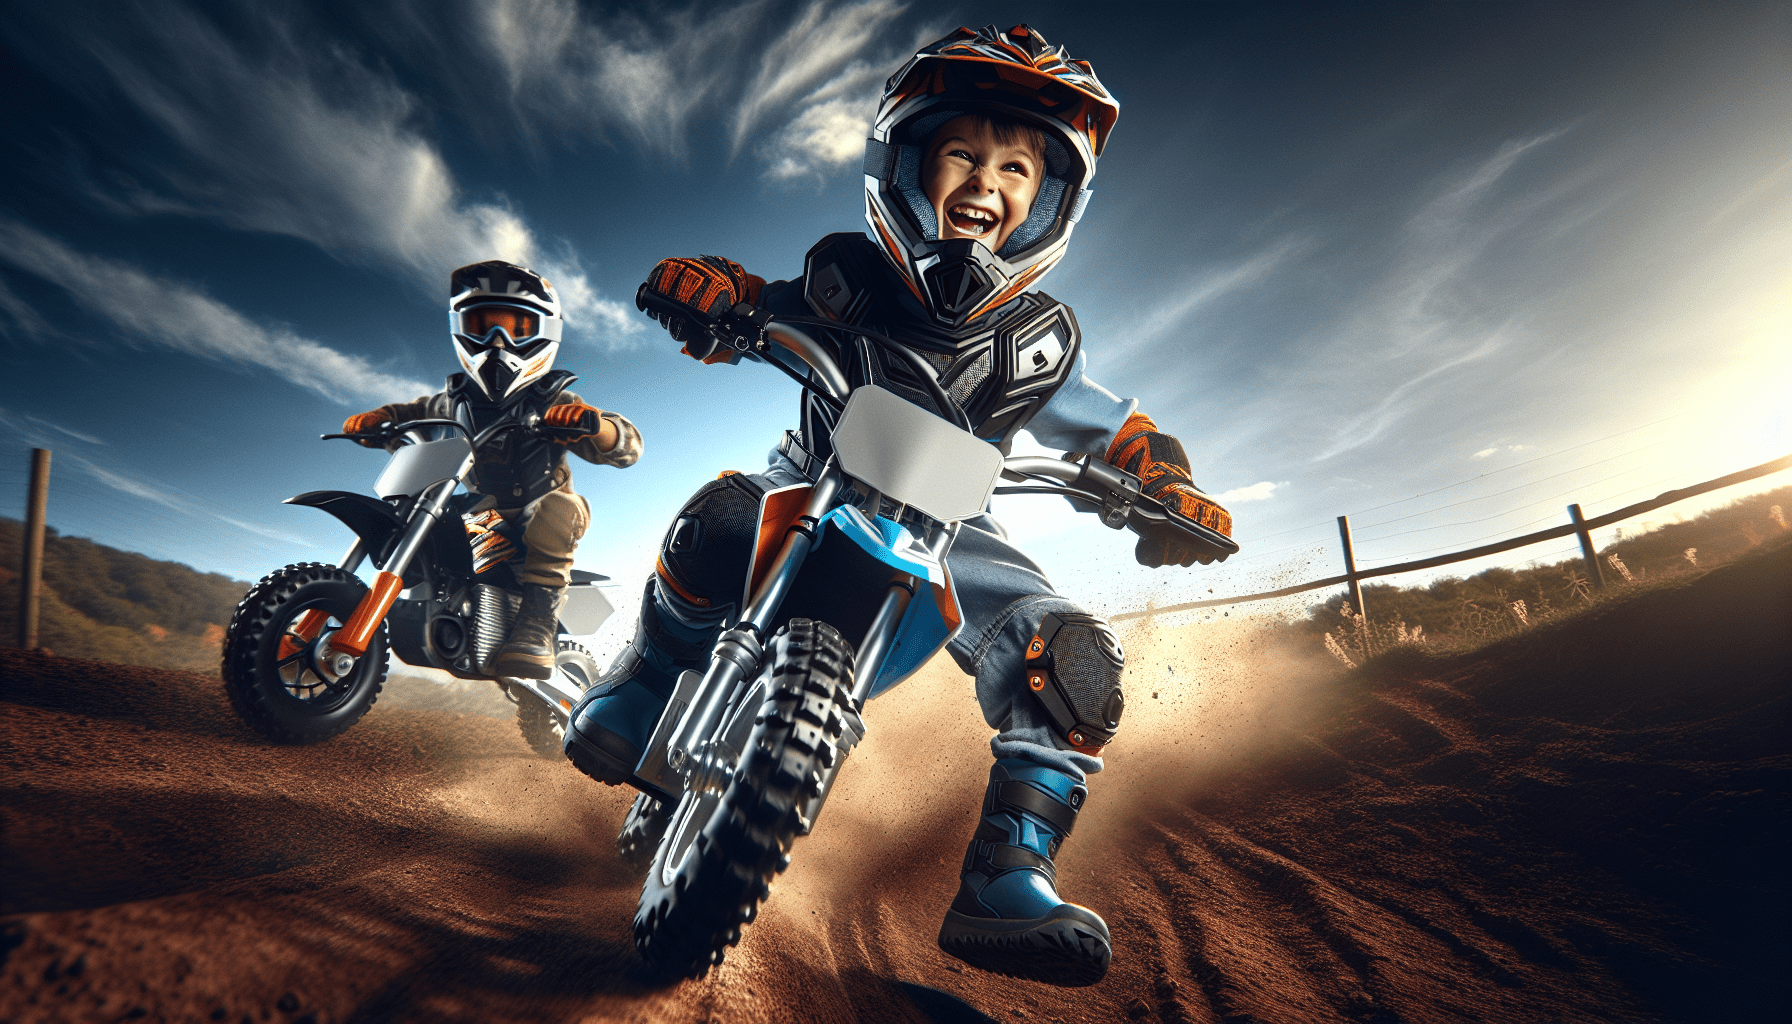 What Are The Best Kids Electric Dirt Bikes?